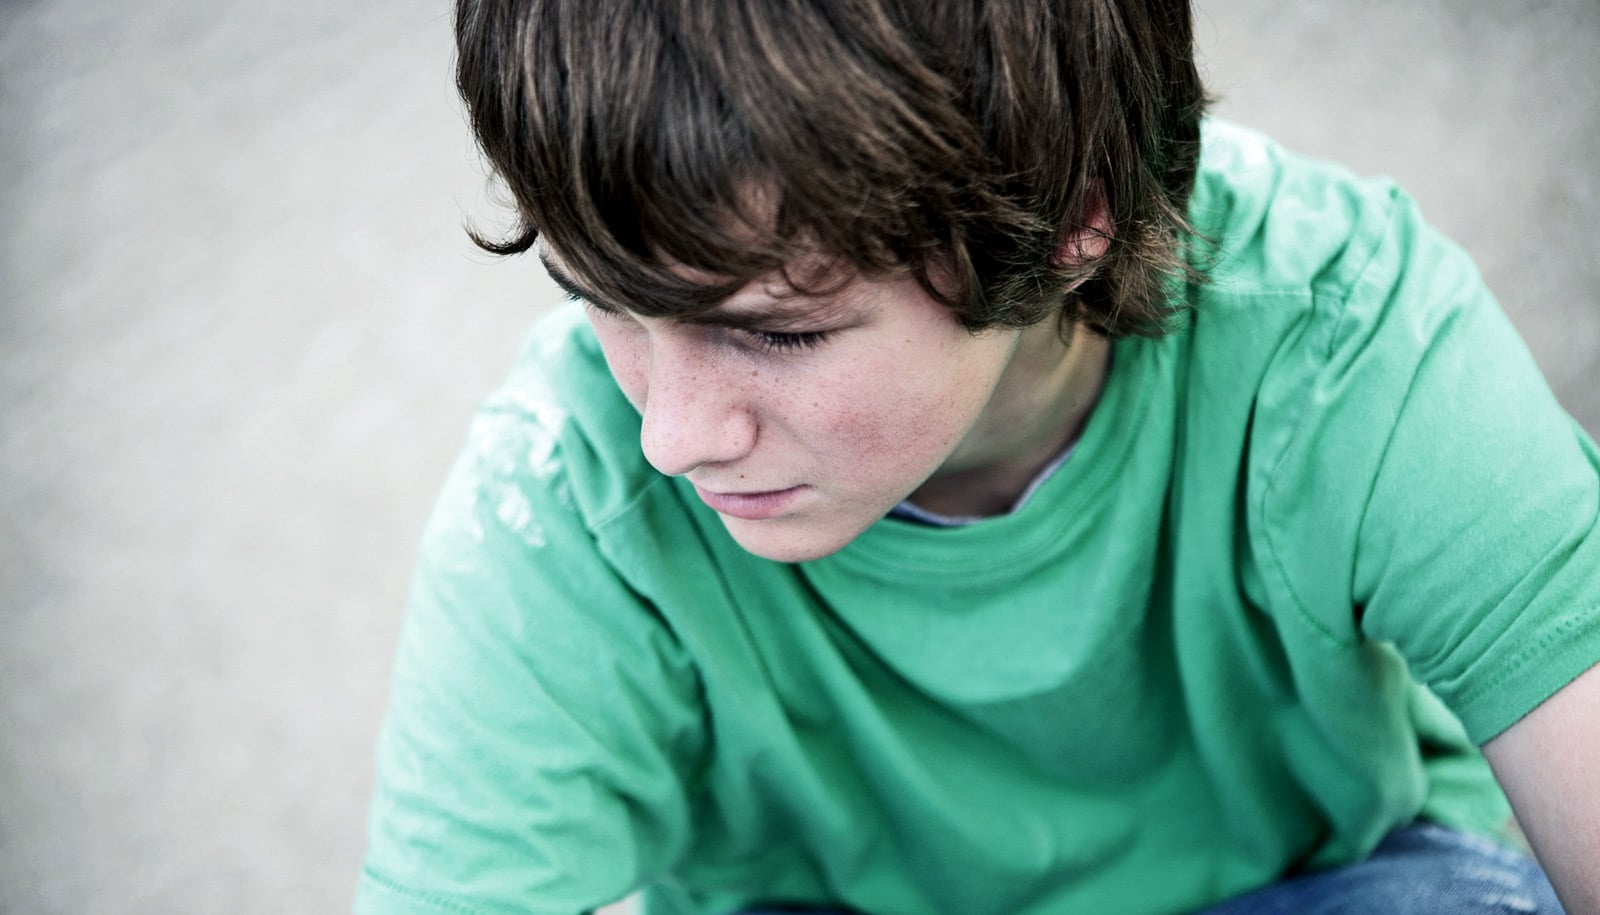 precocious puberty in boys with autism